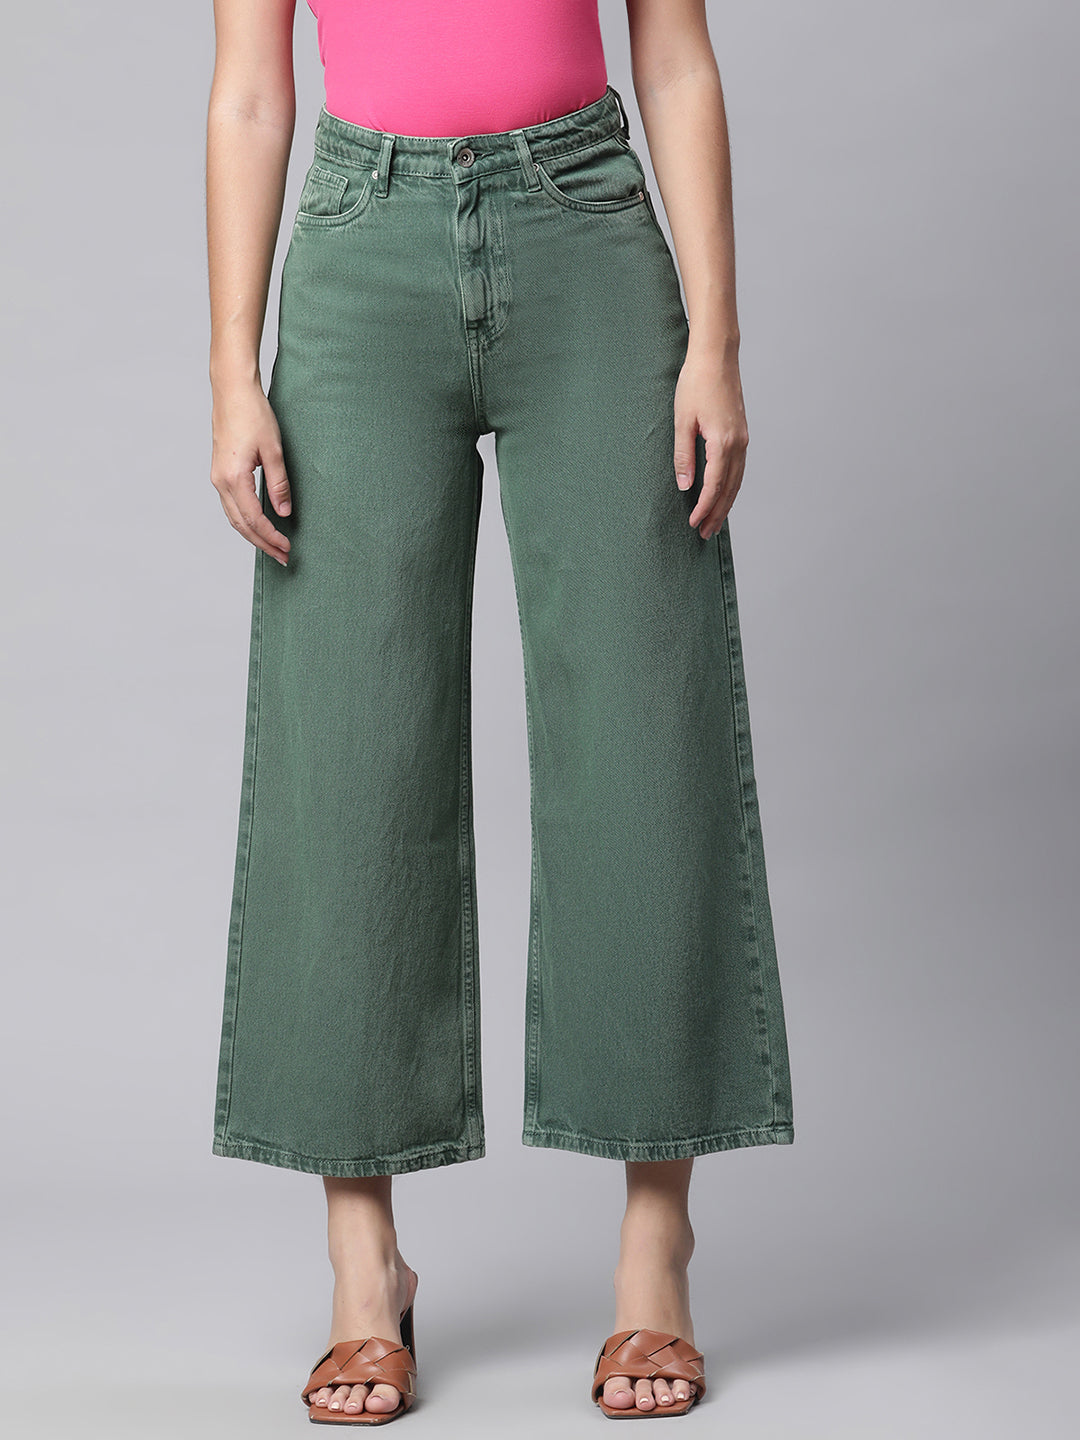 mid rise flared green jeans